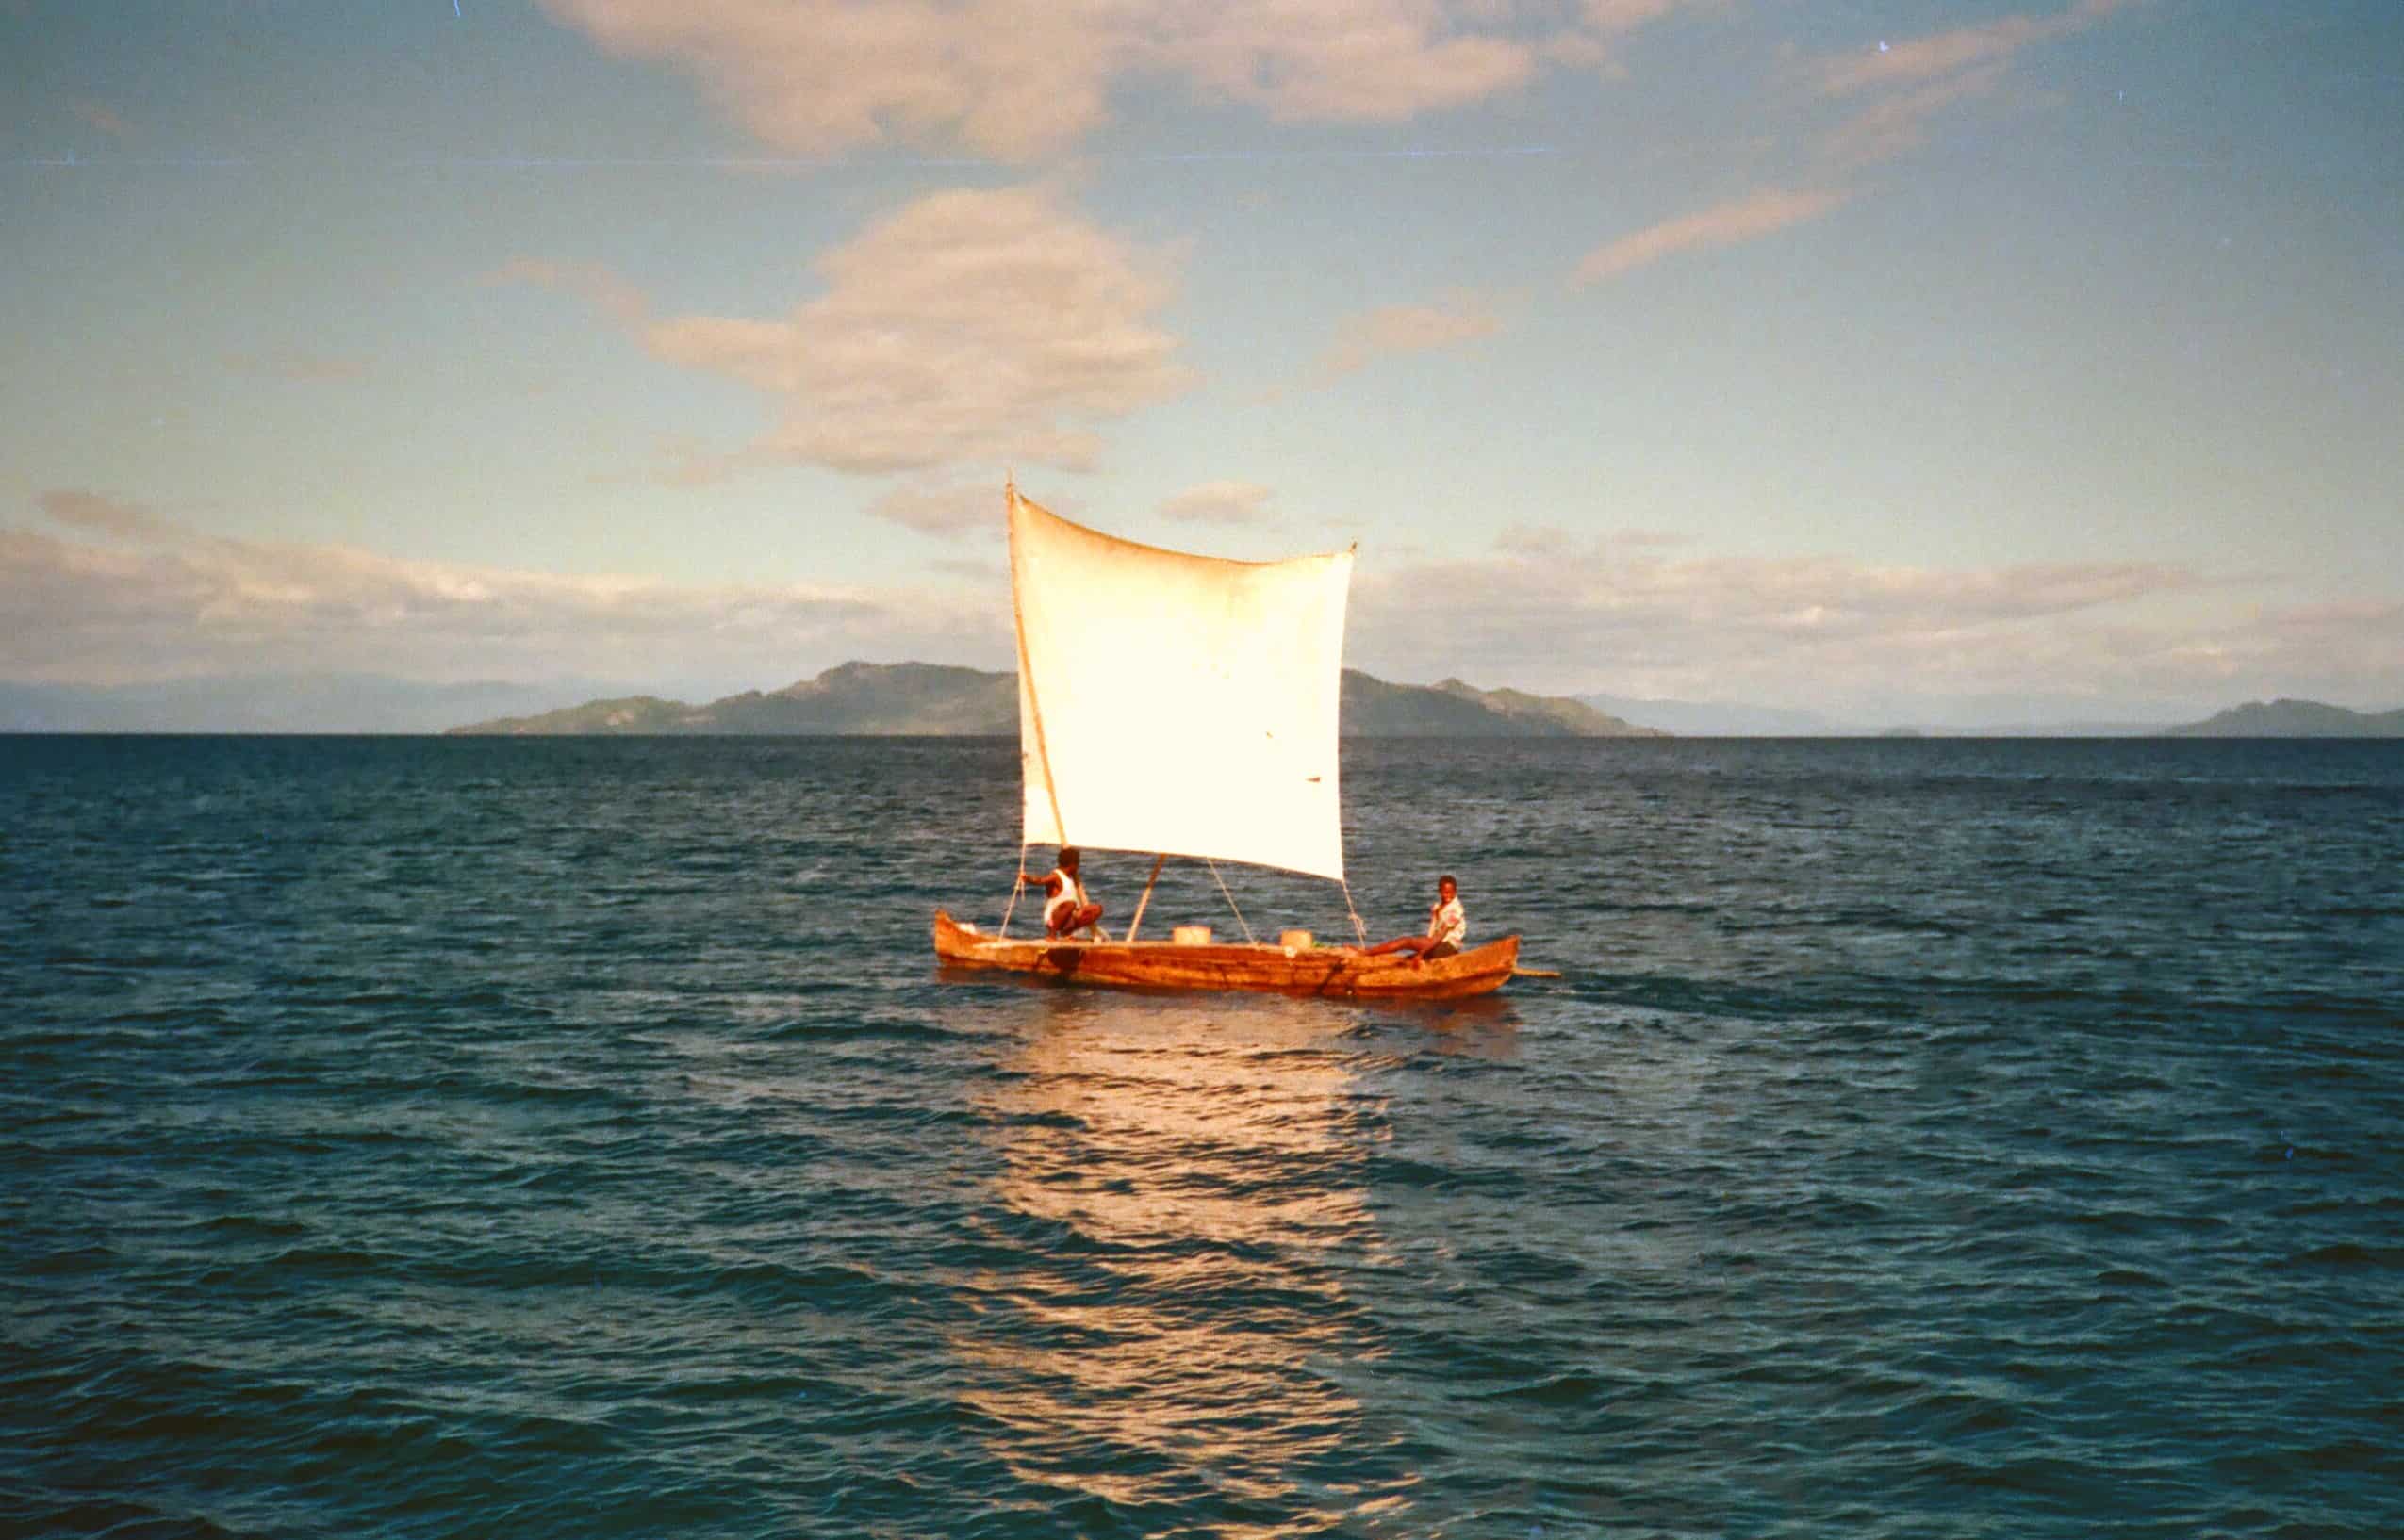 Locals sailing their pirogue across the channel from Hellville to Nosi Komba